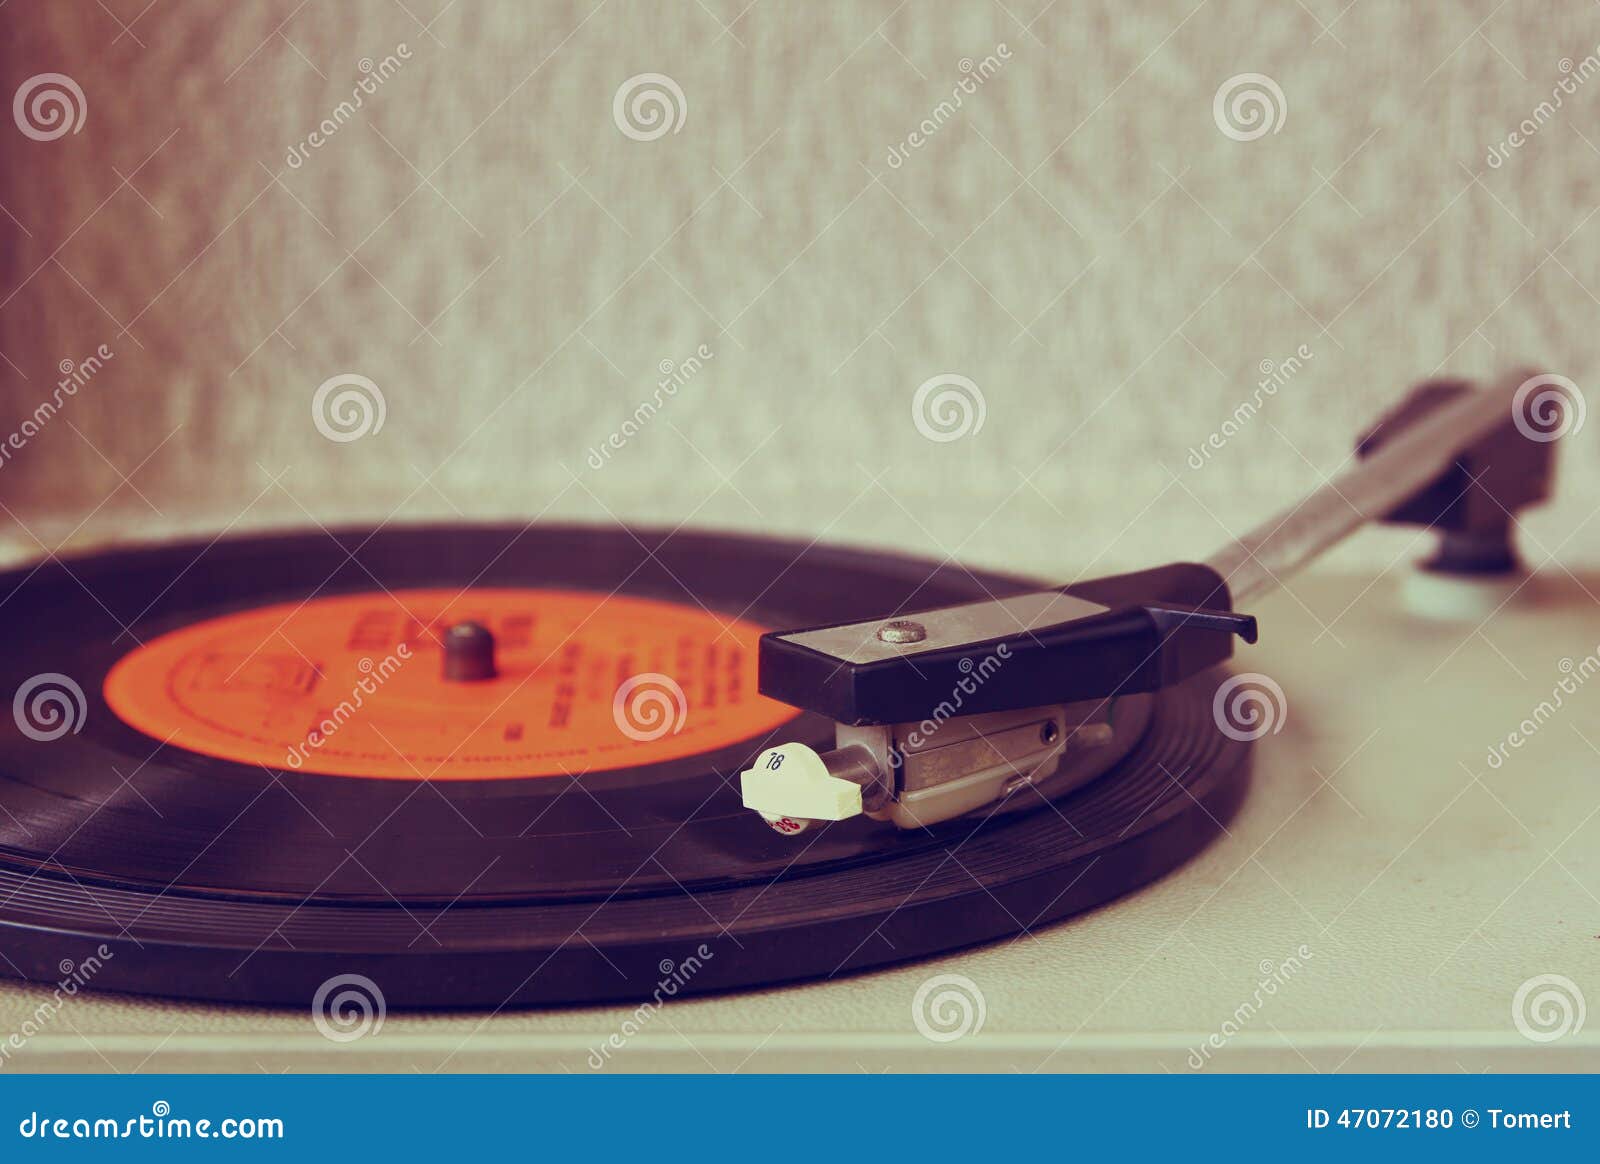 image of old record player, image is retro filtered . selective focus